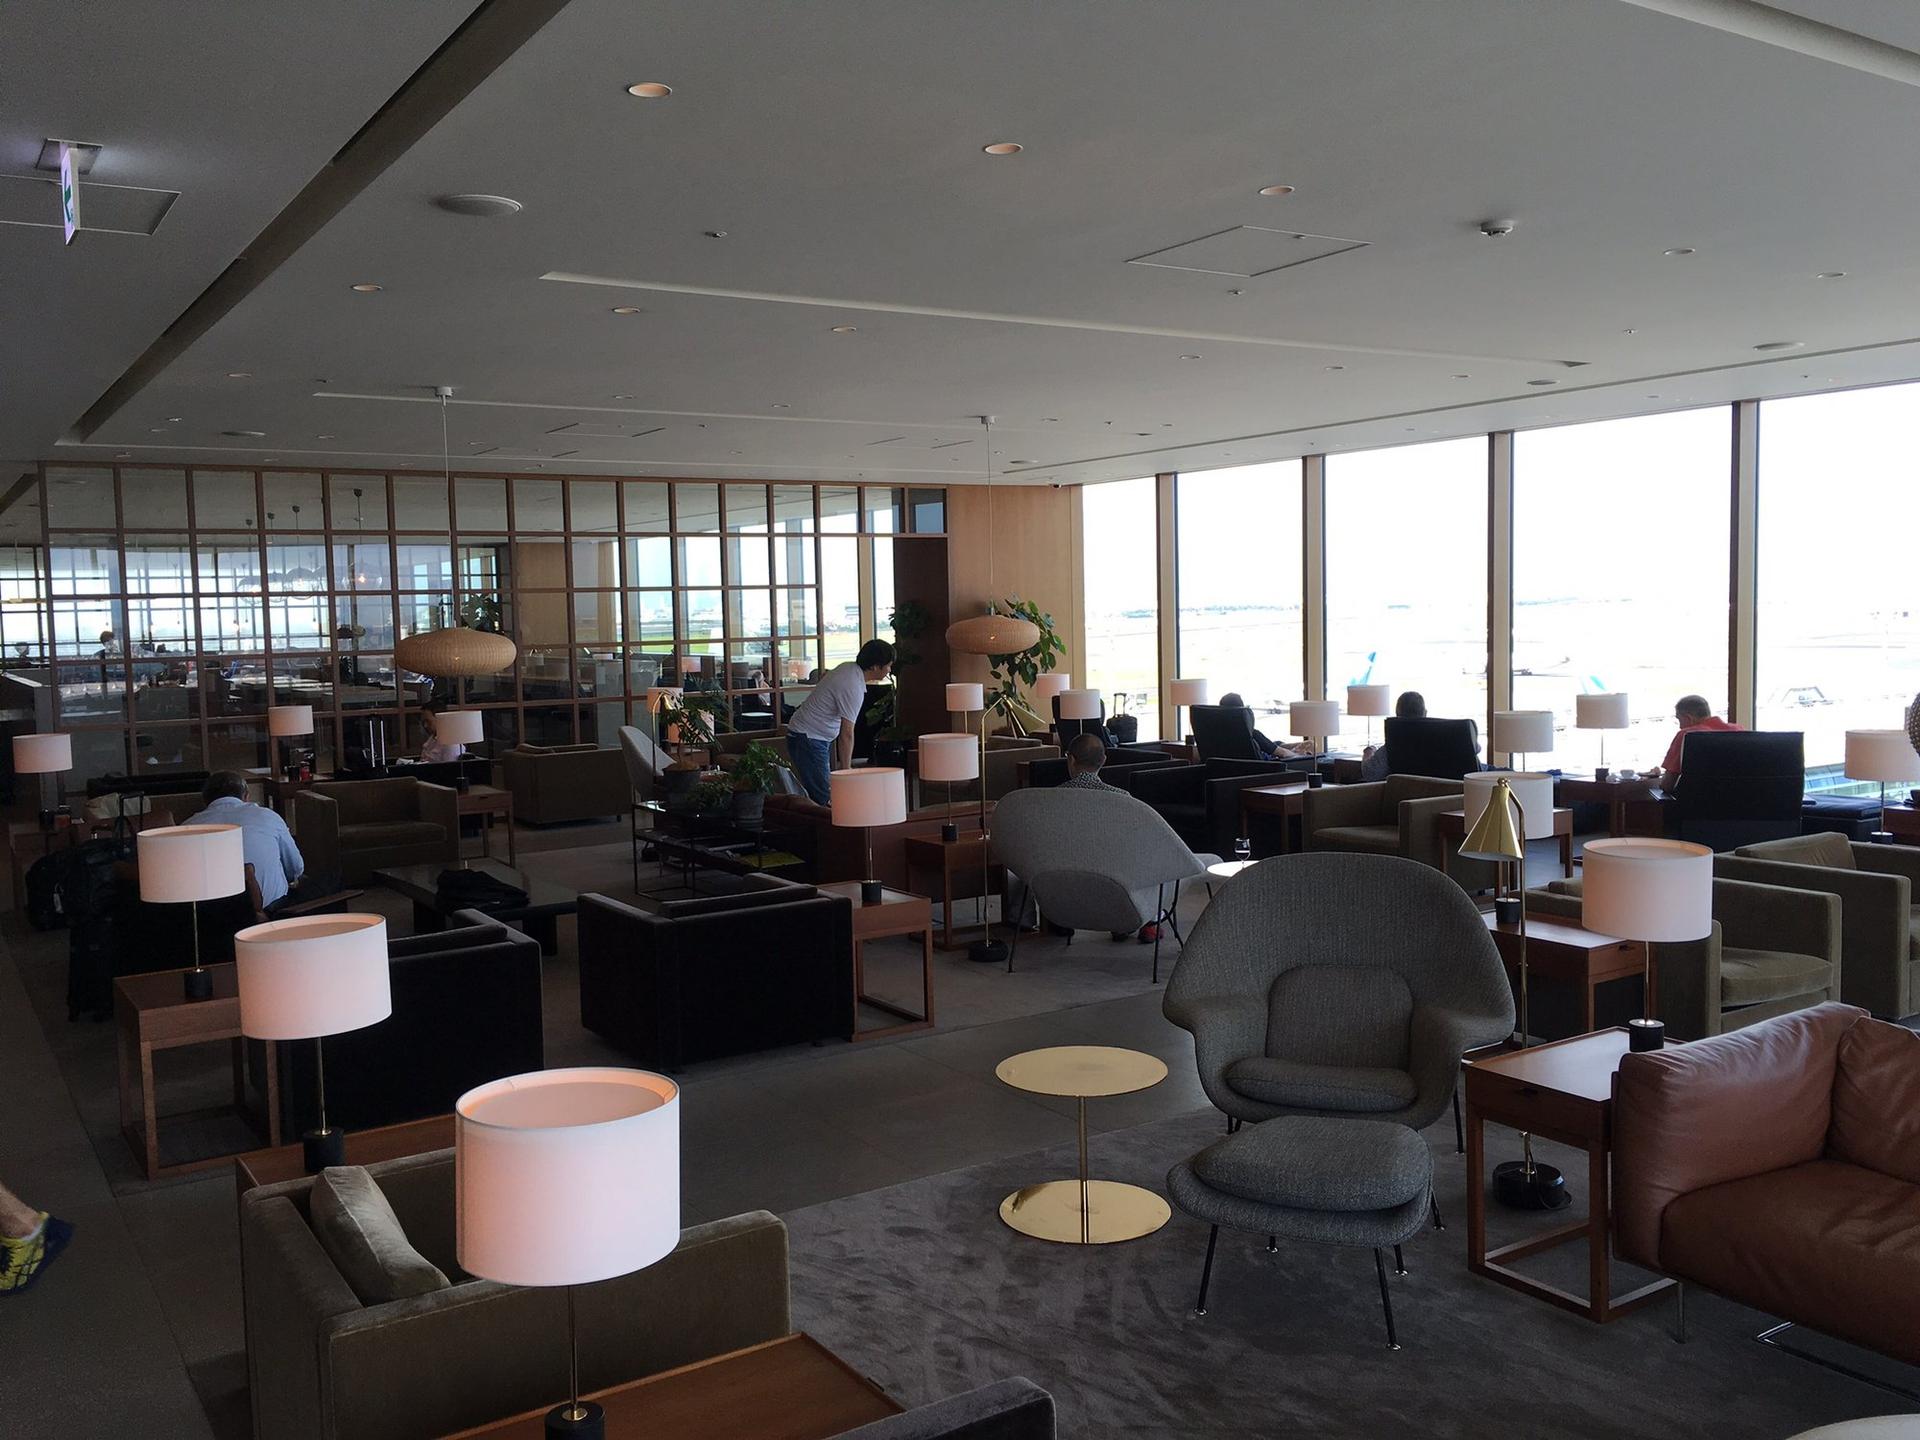 Cathay Pacific Lounge image 45 of 49